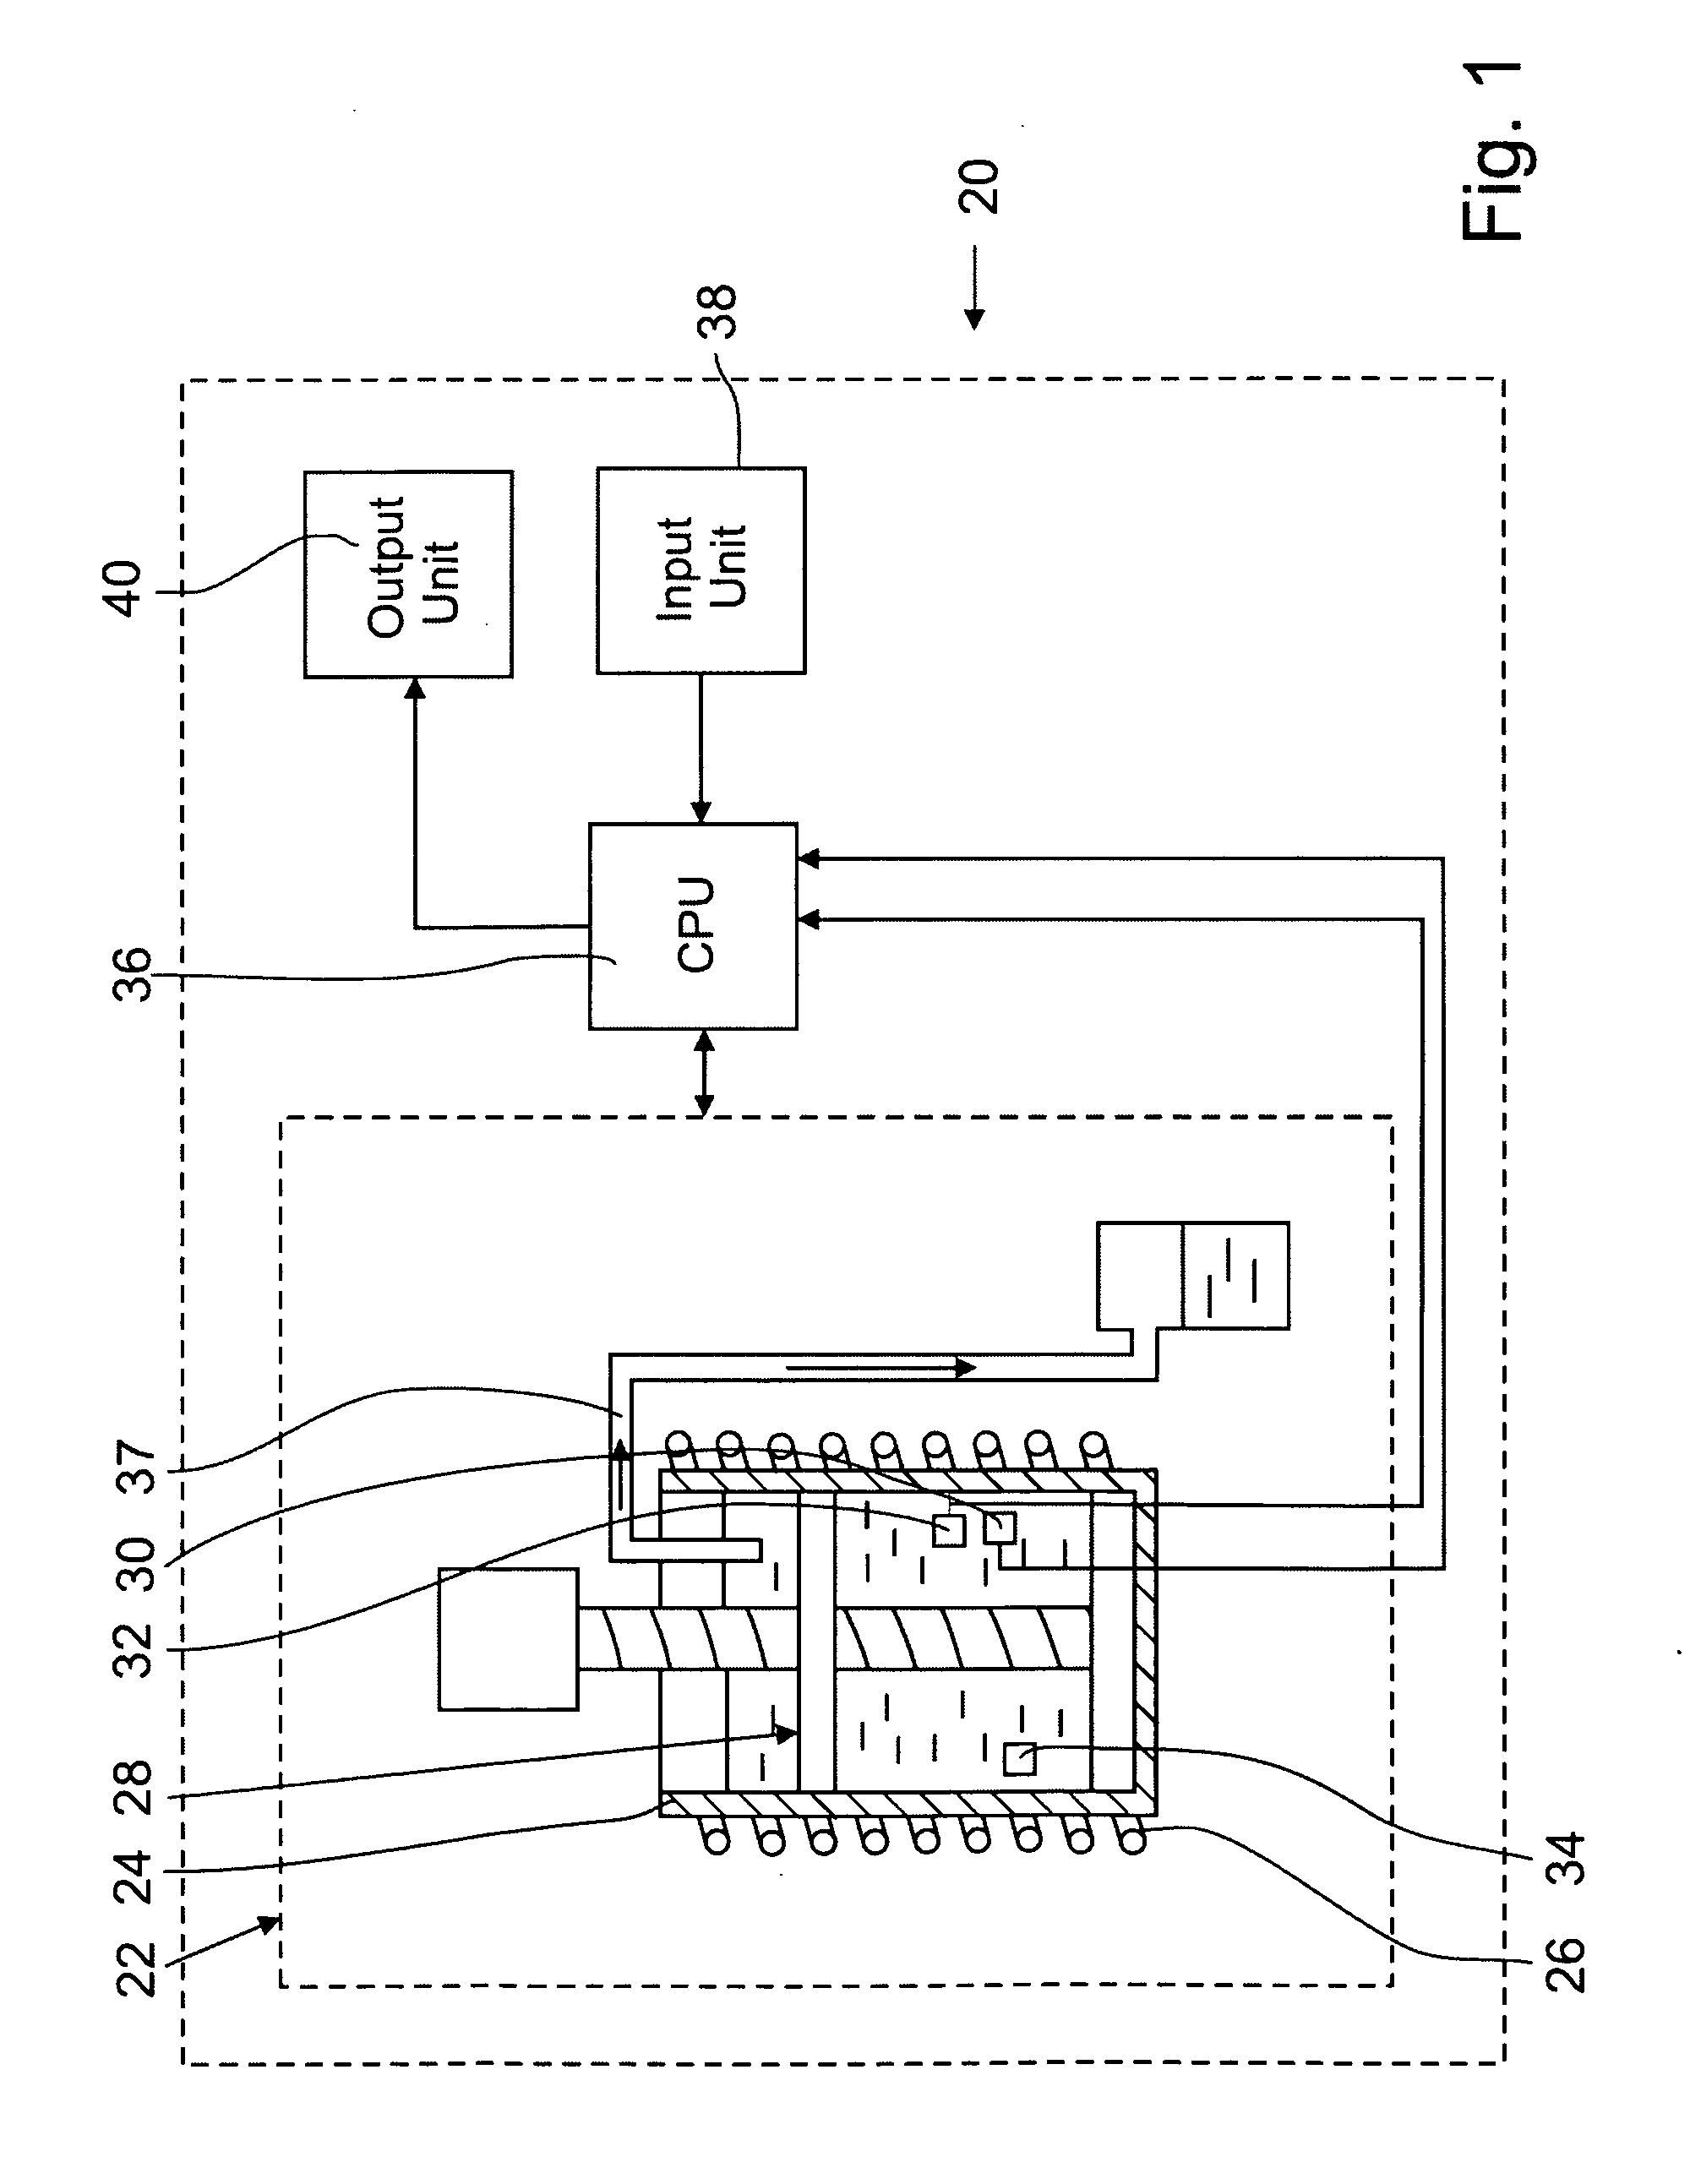 Interactive food-and beverage preparation and wine-making system and method